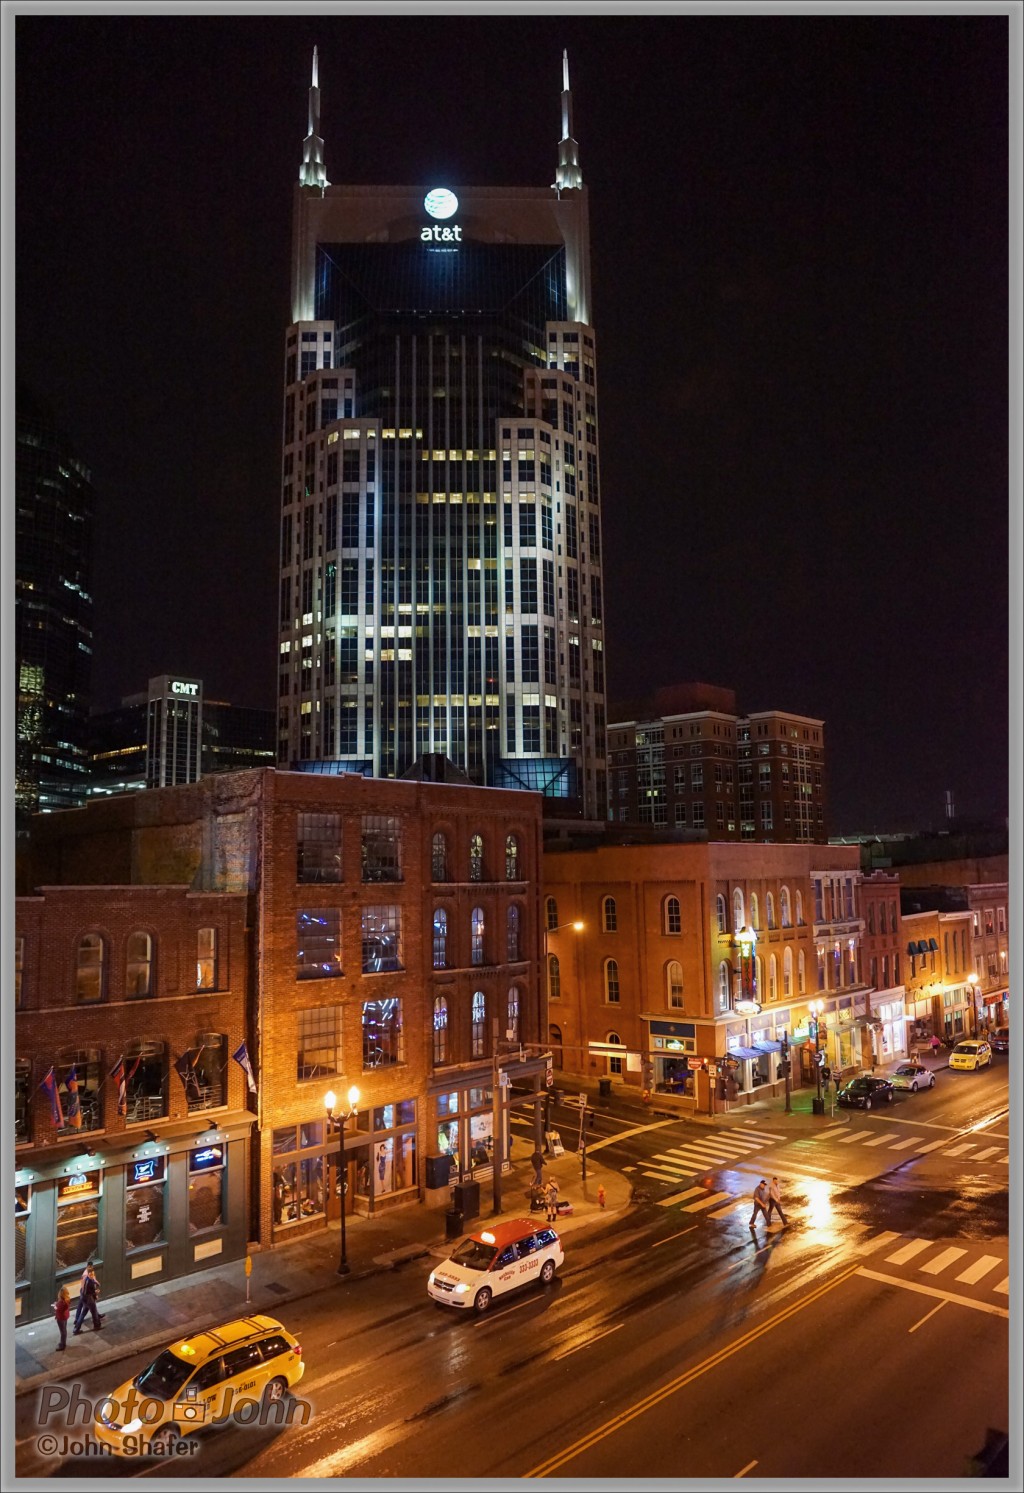 Nashville's Music Row With the AT&T Building In the Background - Sony Alpha A7R